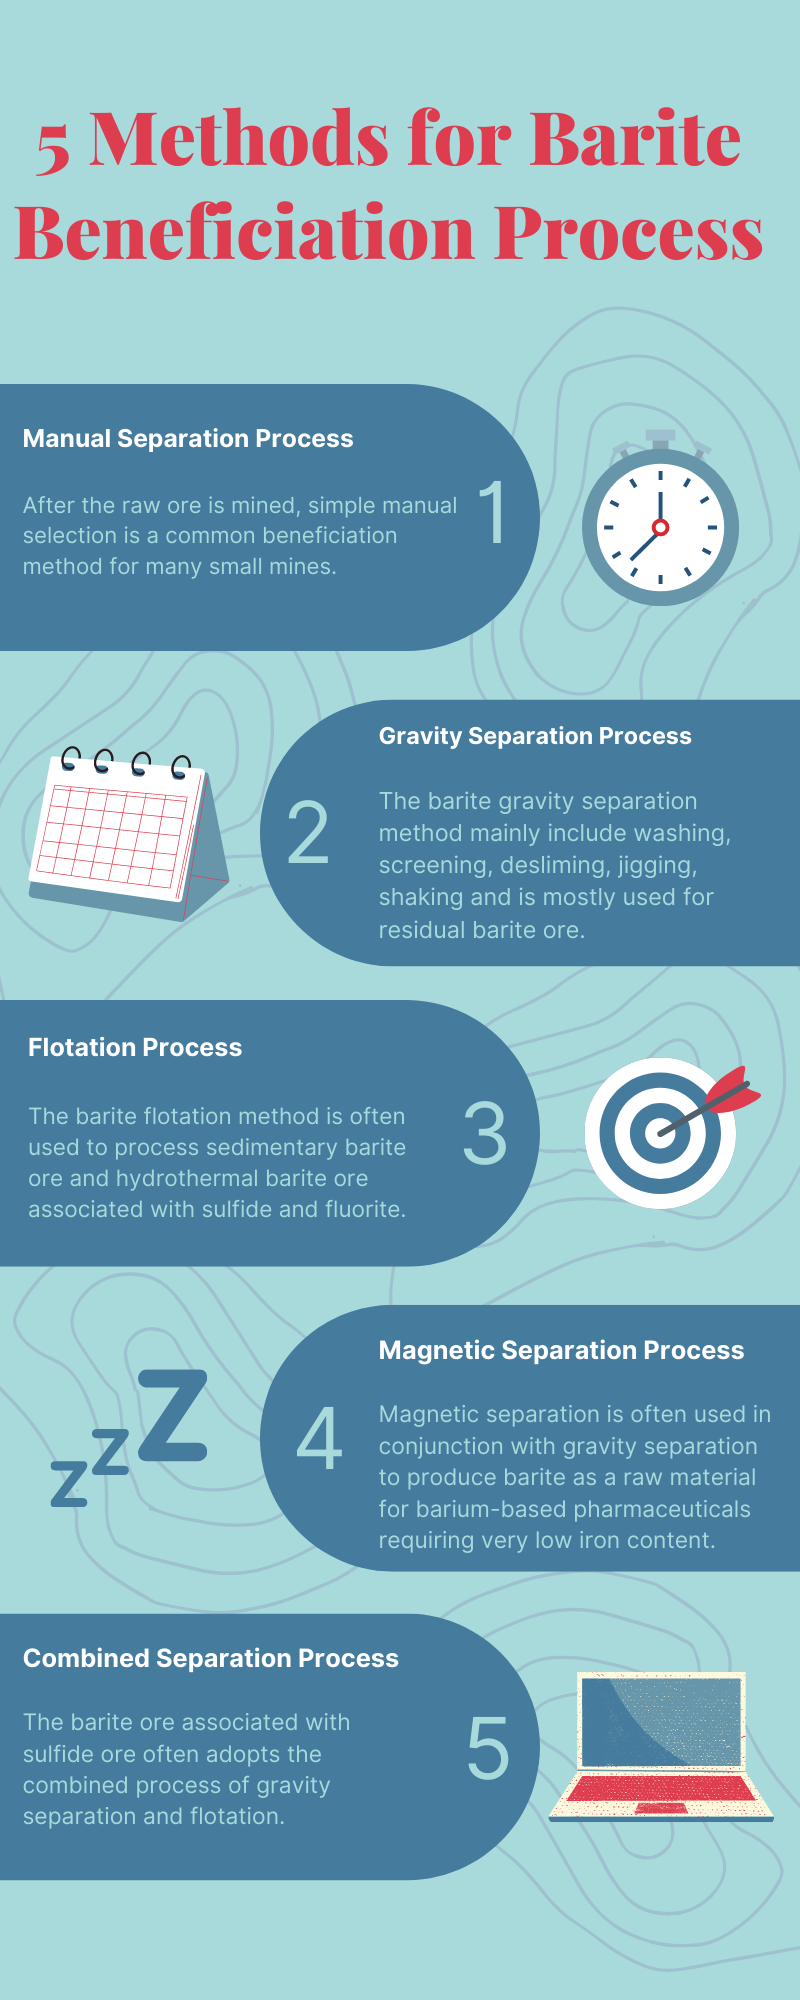 5 Methods for Barite Beneficiation Process.png